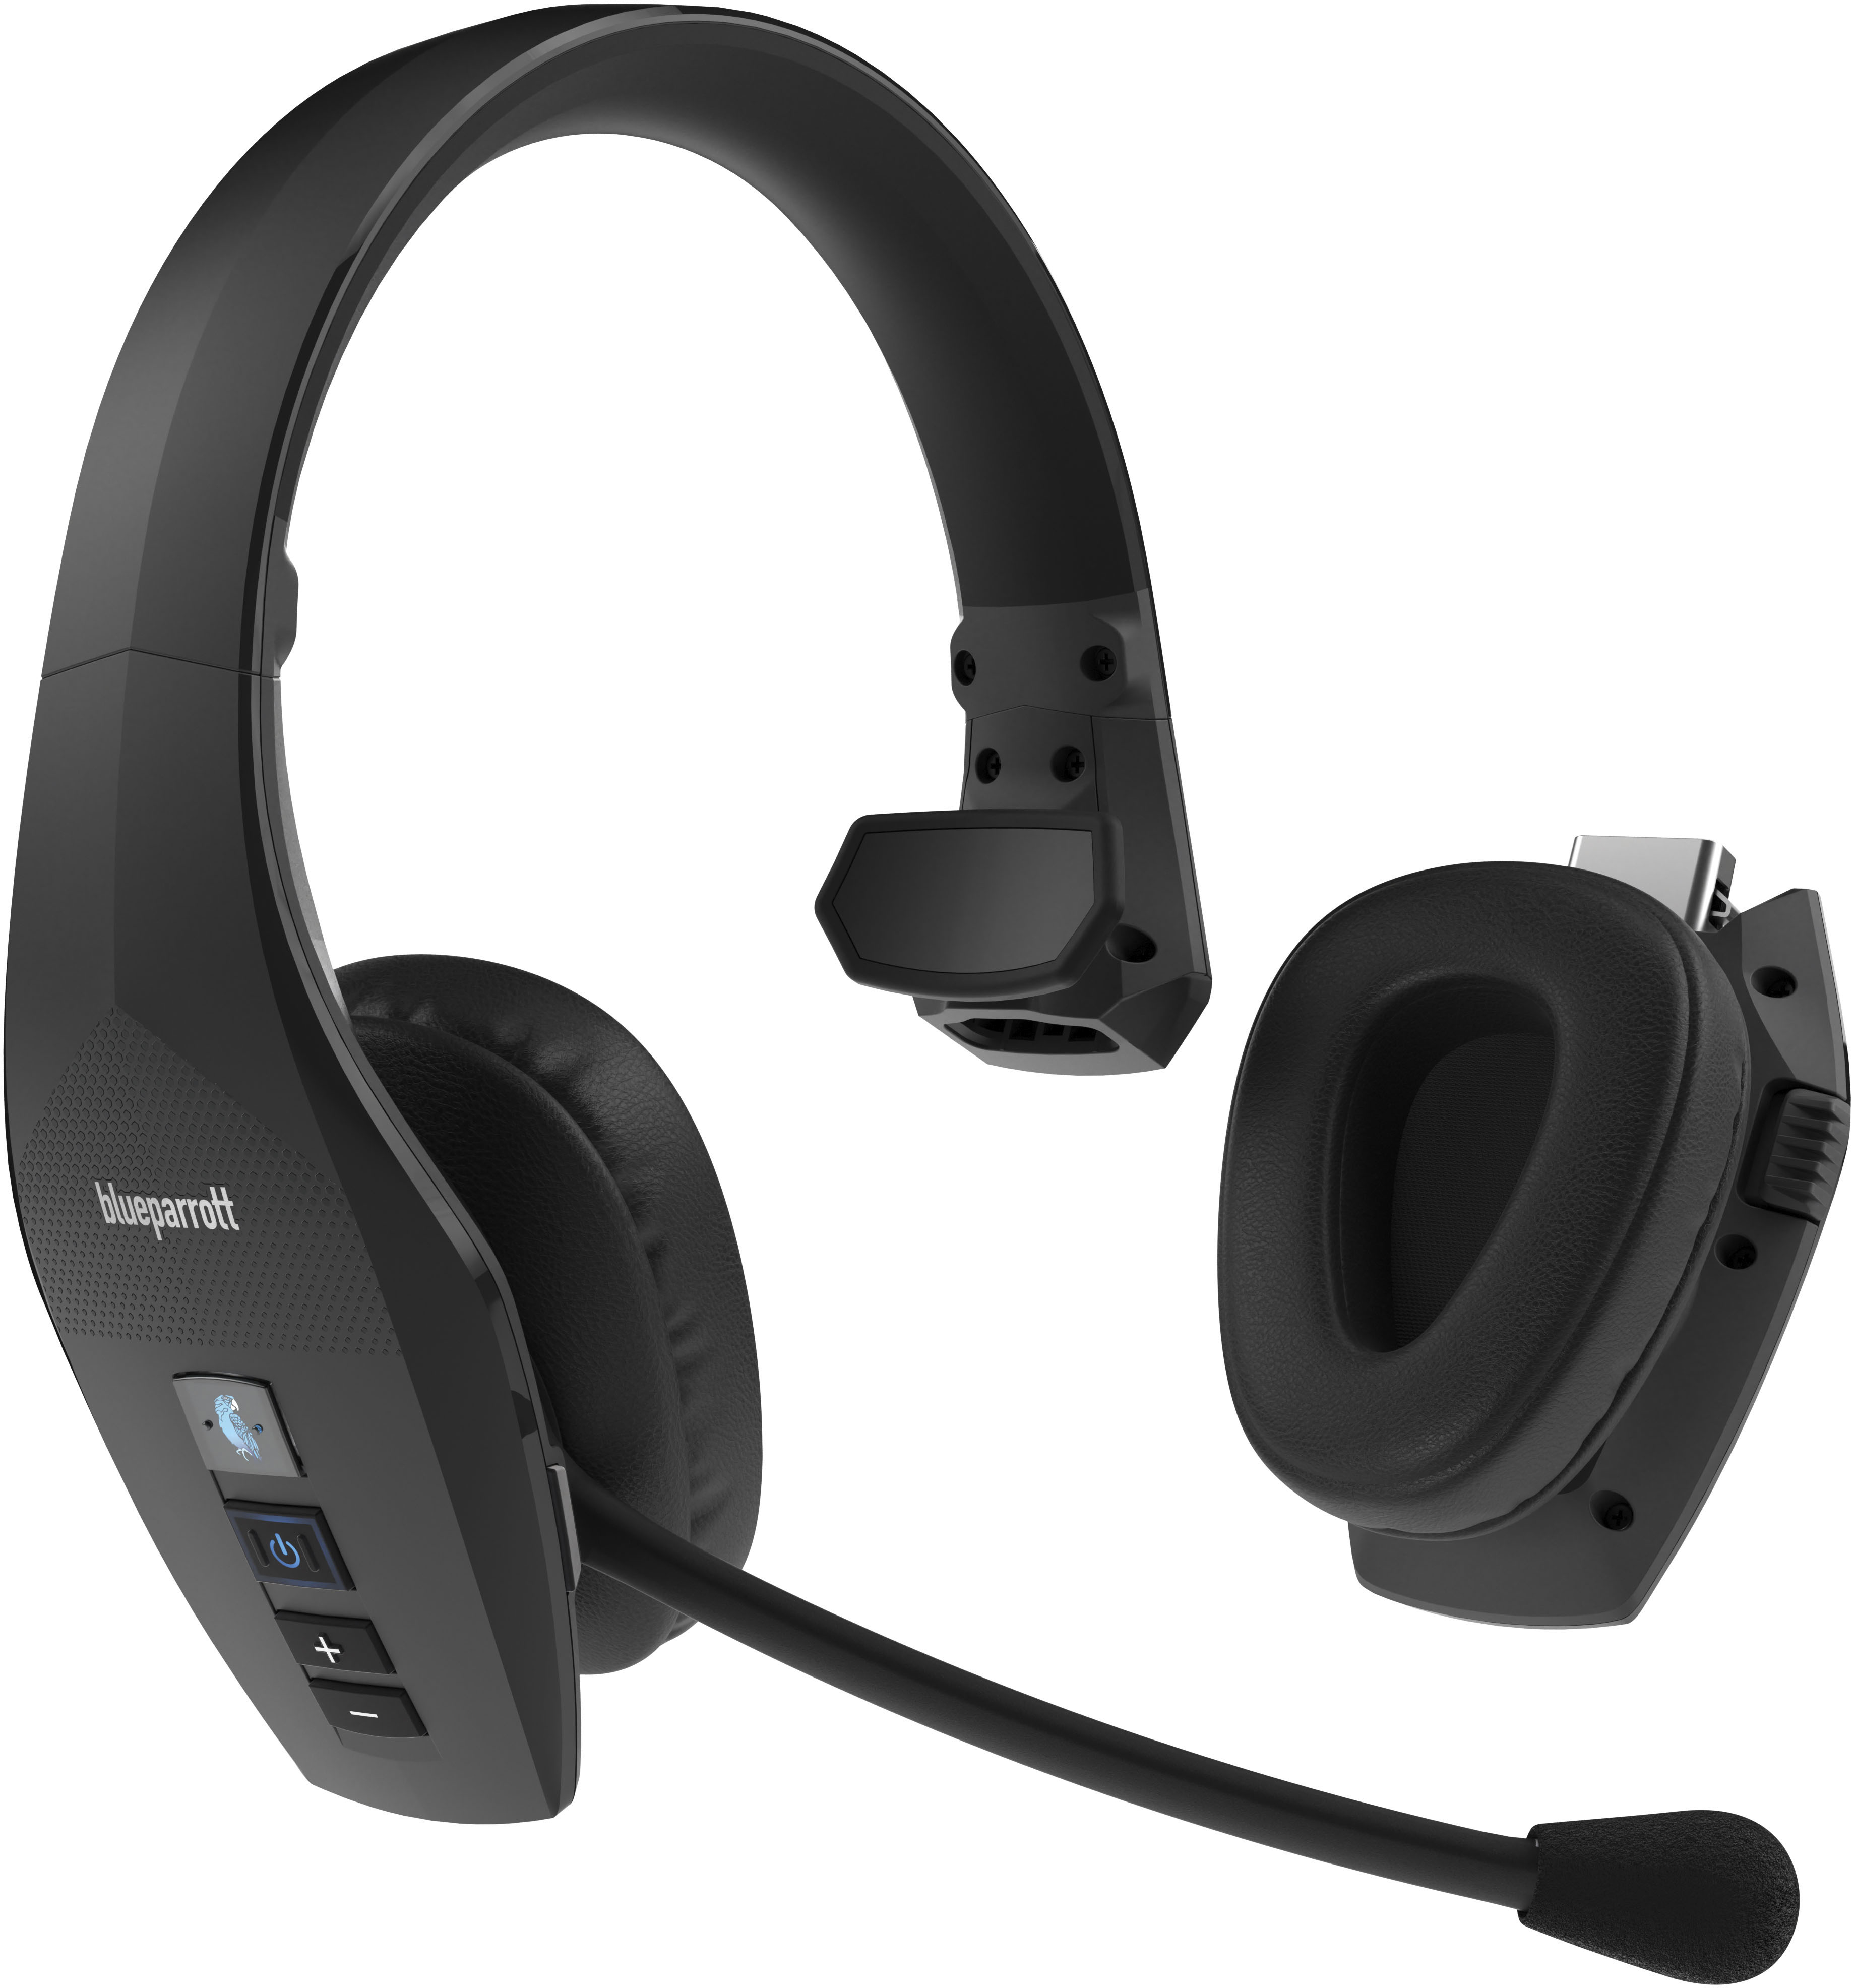 S650-XT with Active Headset Noise Cancellation Wireless Convertible Buy 2-in1 - Best Black 204292 BlueParrott